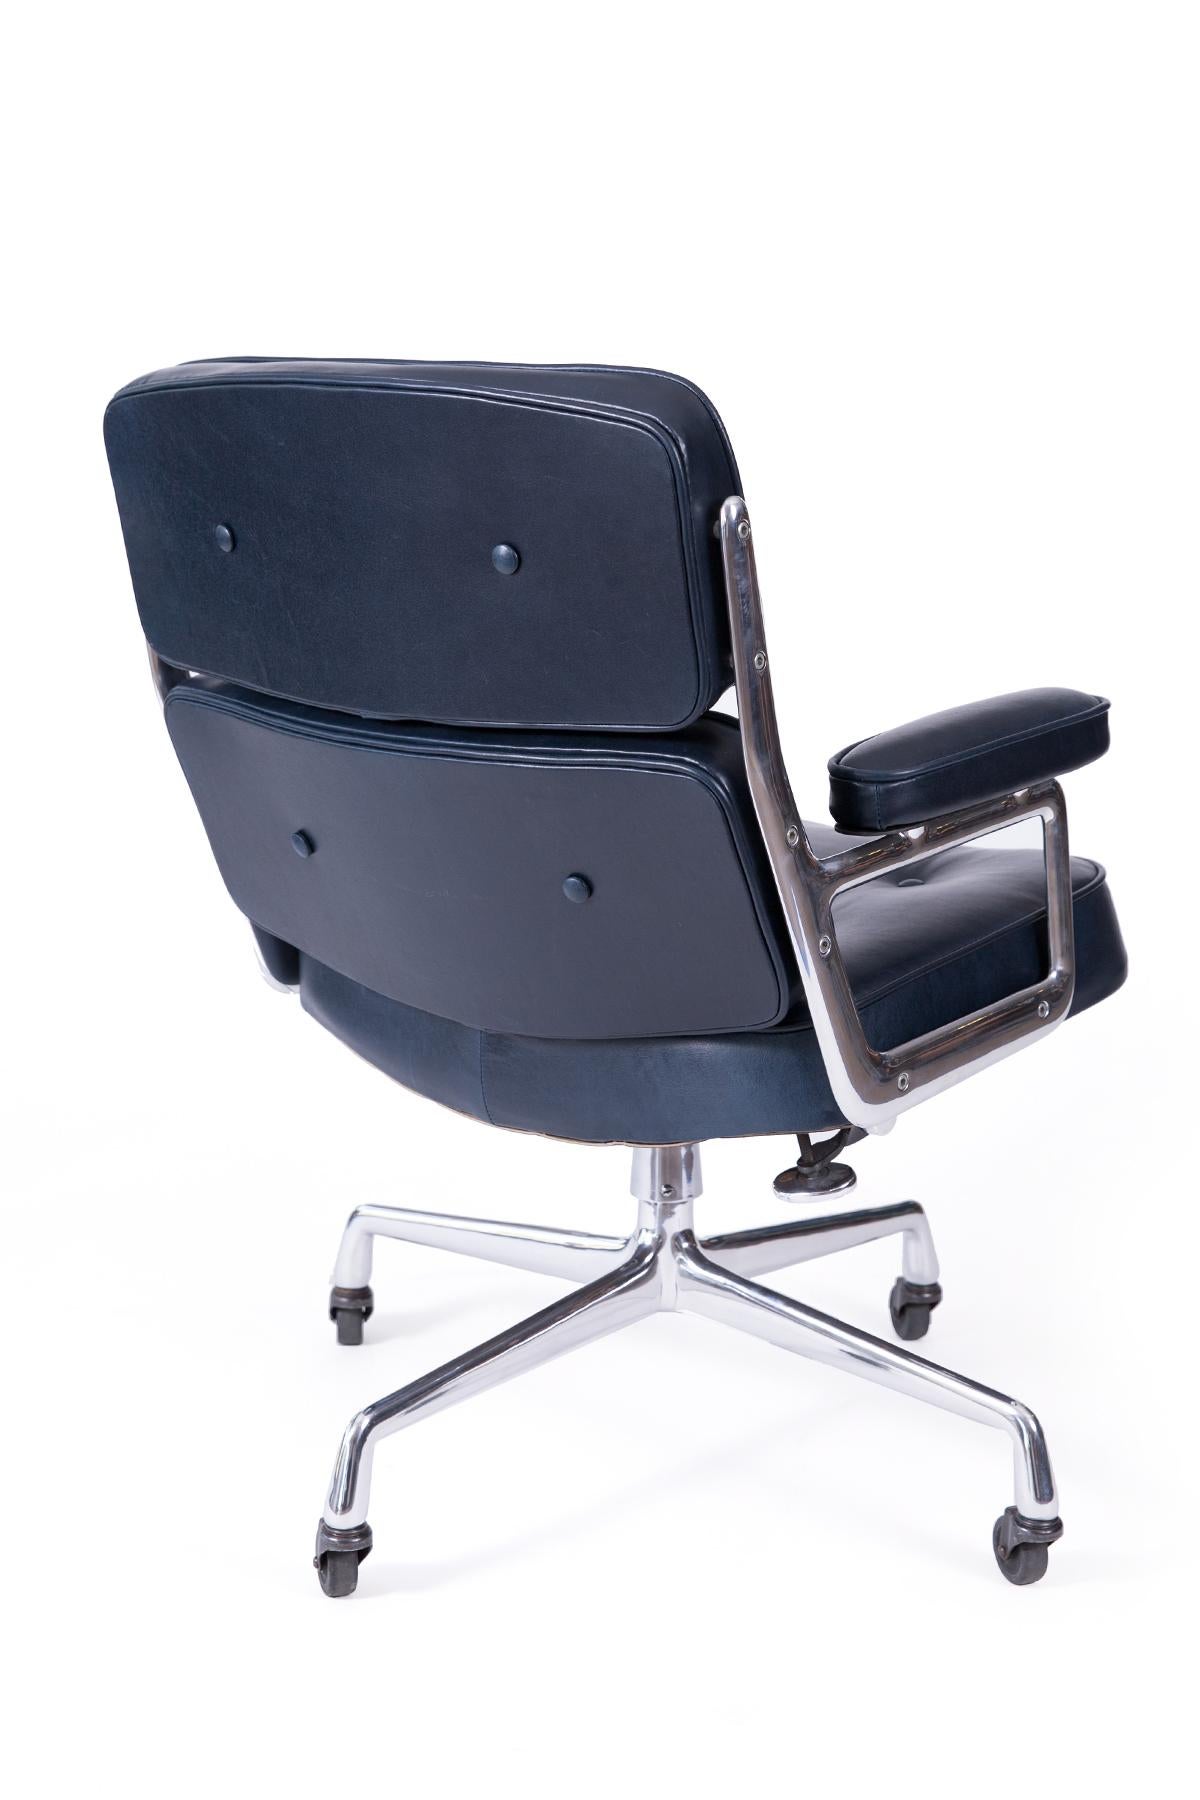 Mid-Century Modern Eames Executive Office Chair